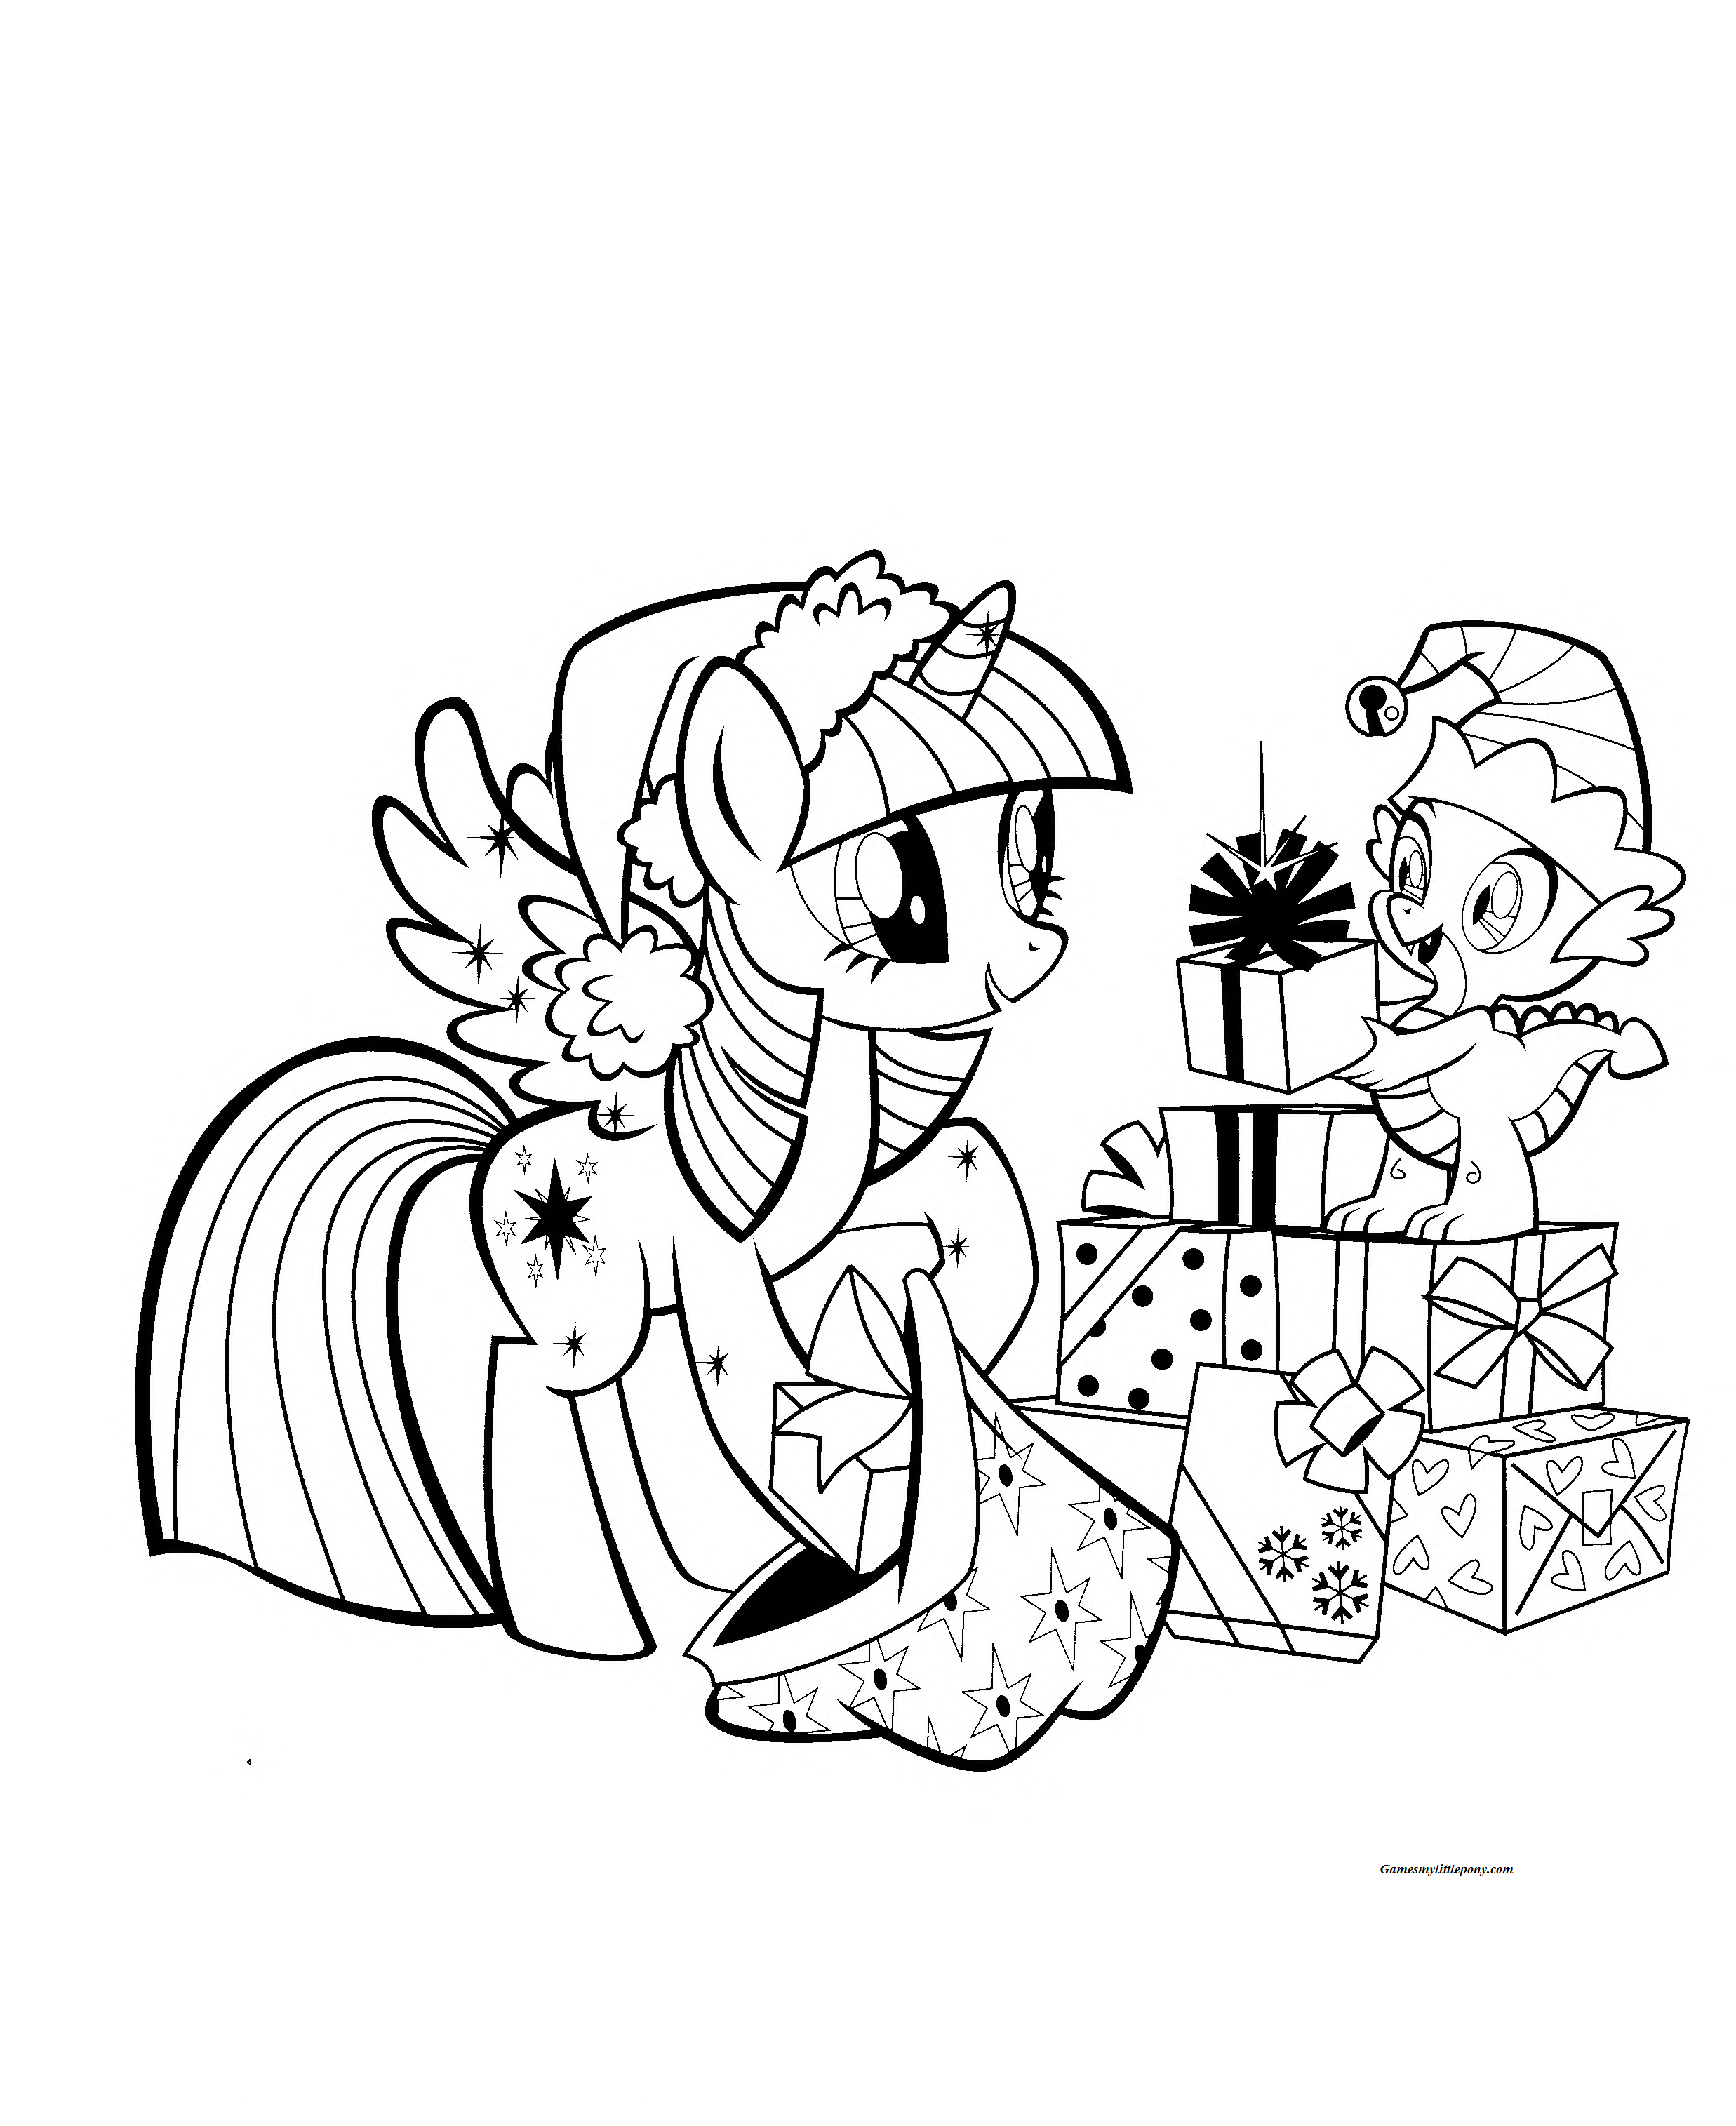 My Little Pony Coloring Pages Christmas - creaturasymonecos